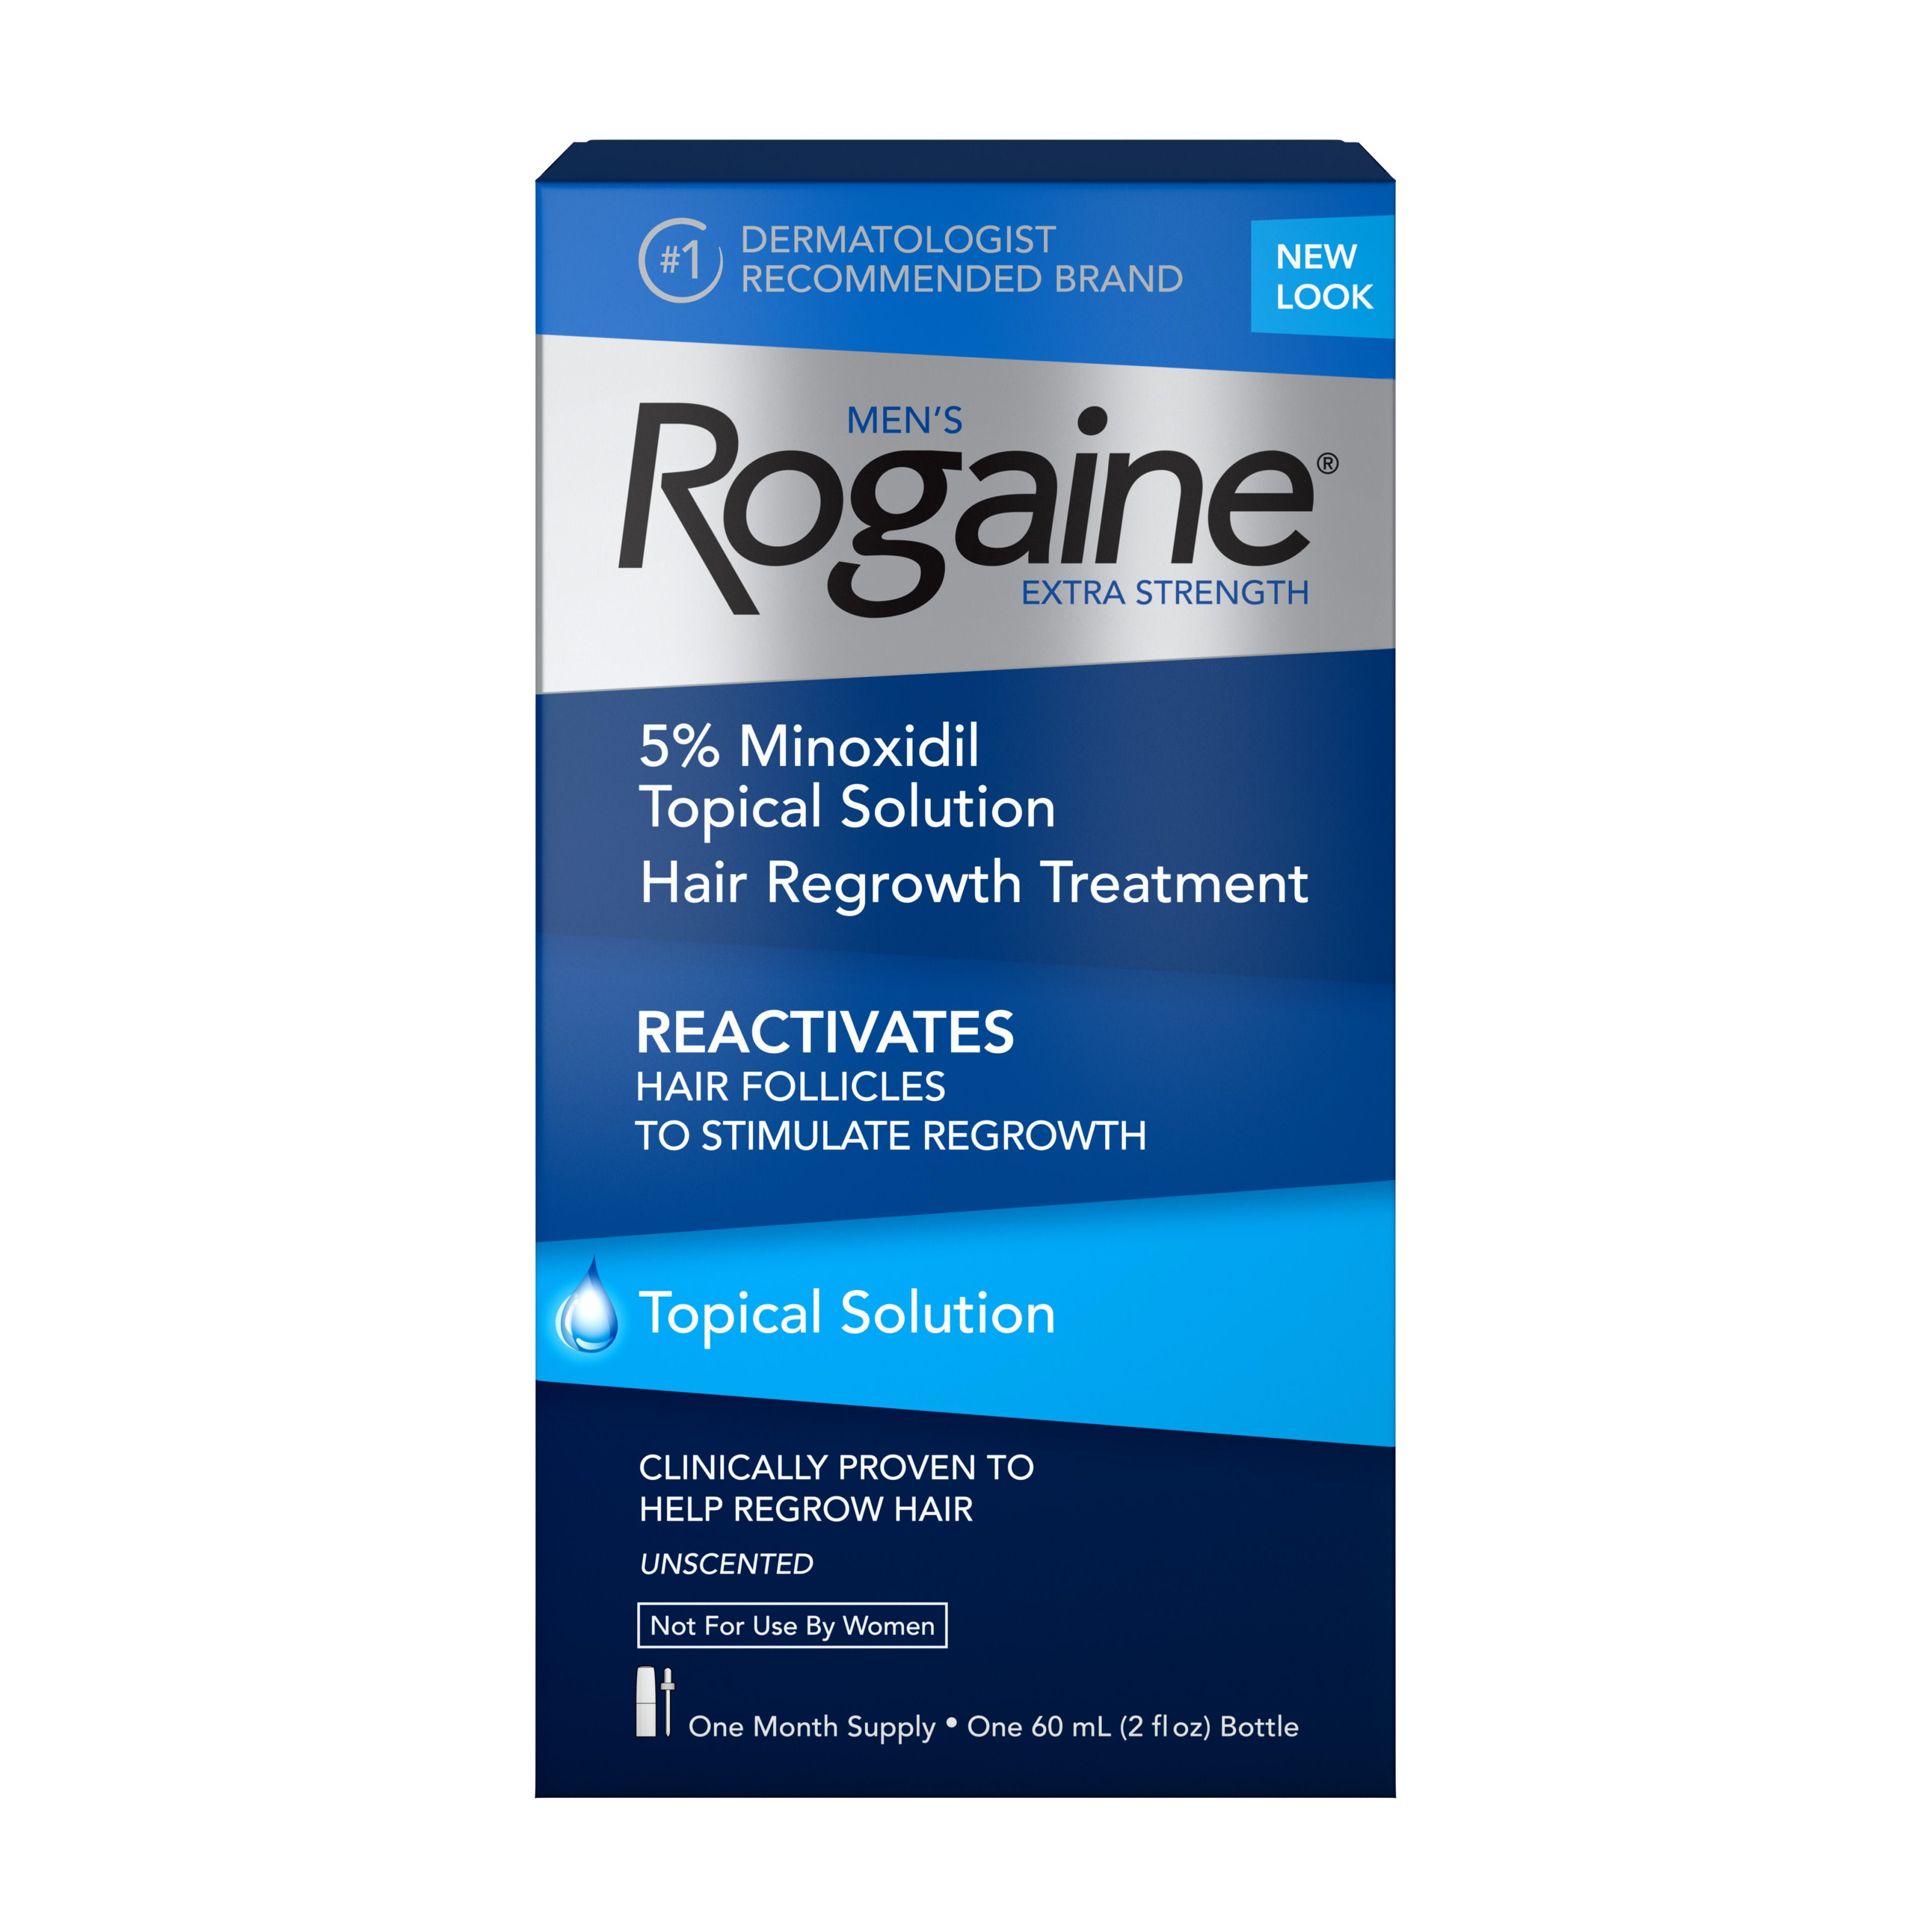 men-s-rogaine-rogaine-sub-brand-topical-solution-with-5-minoxidil-one